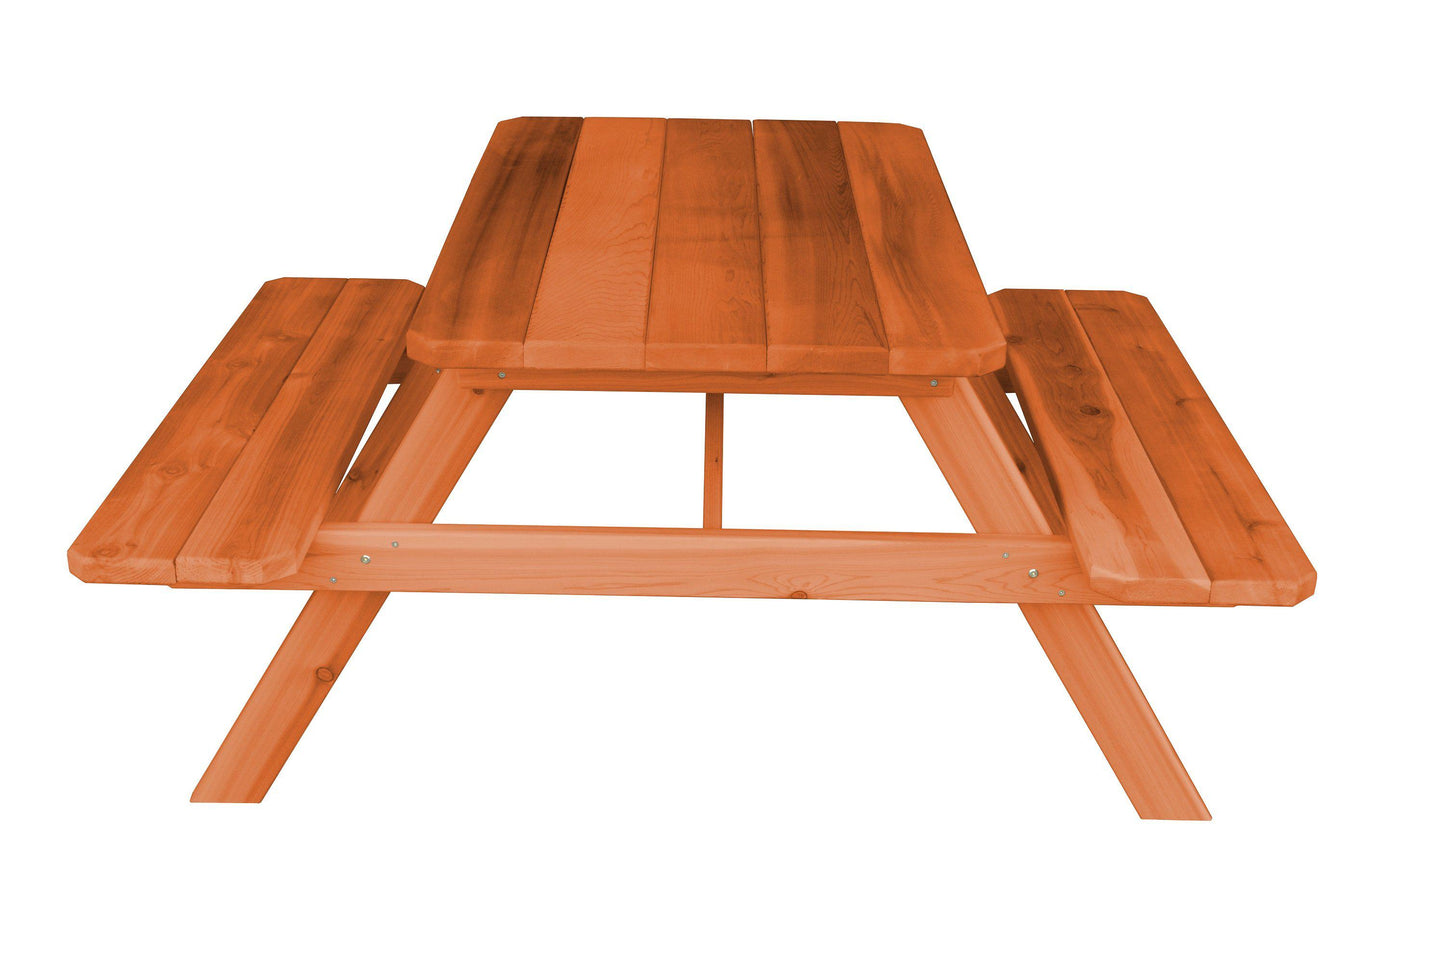 A&L FURNITURE CO. Western Red Cedar 5' Table w/Attached Benches - Specify for FREE 2" Umbrella Hole - LEAD TIME TO SHIP 2 WEEKS